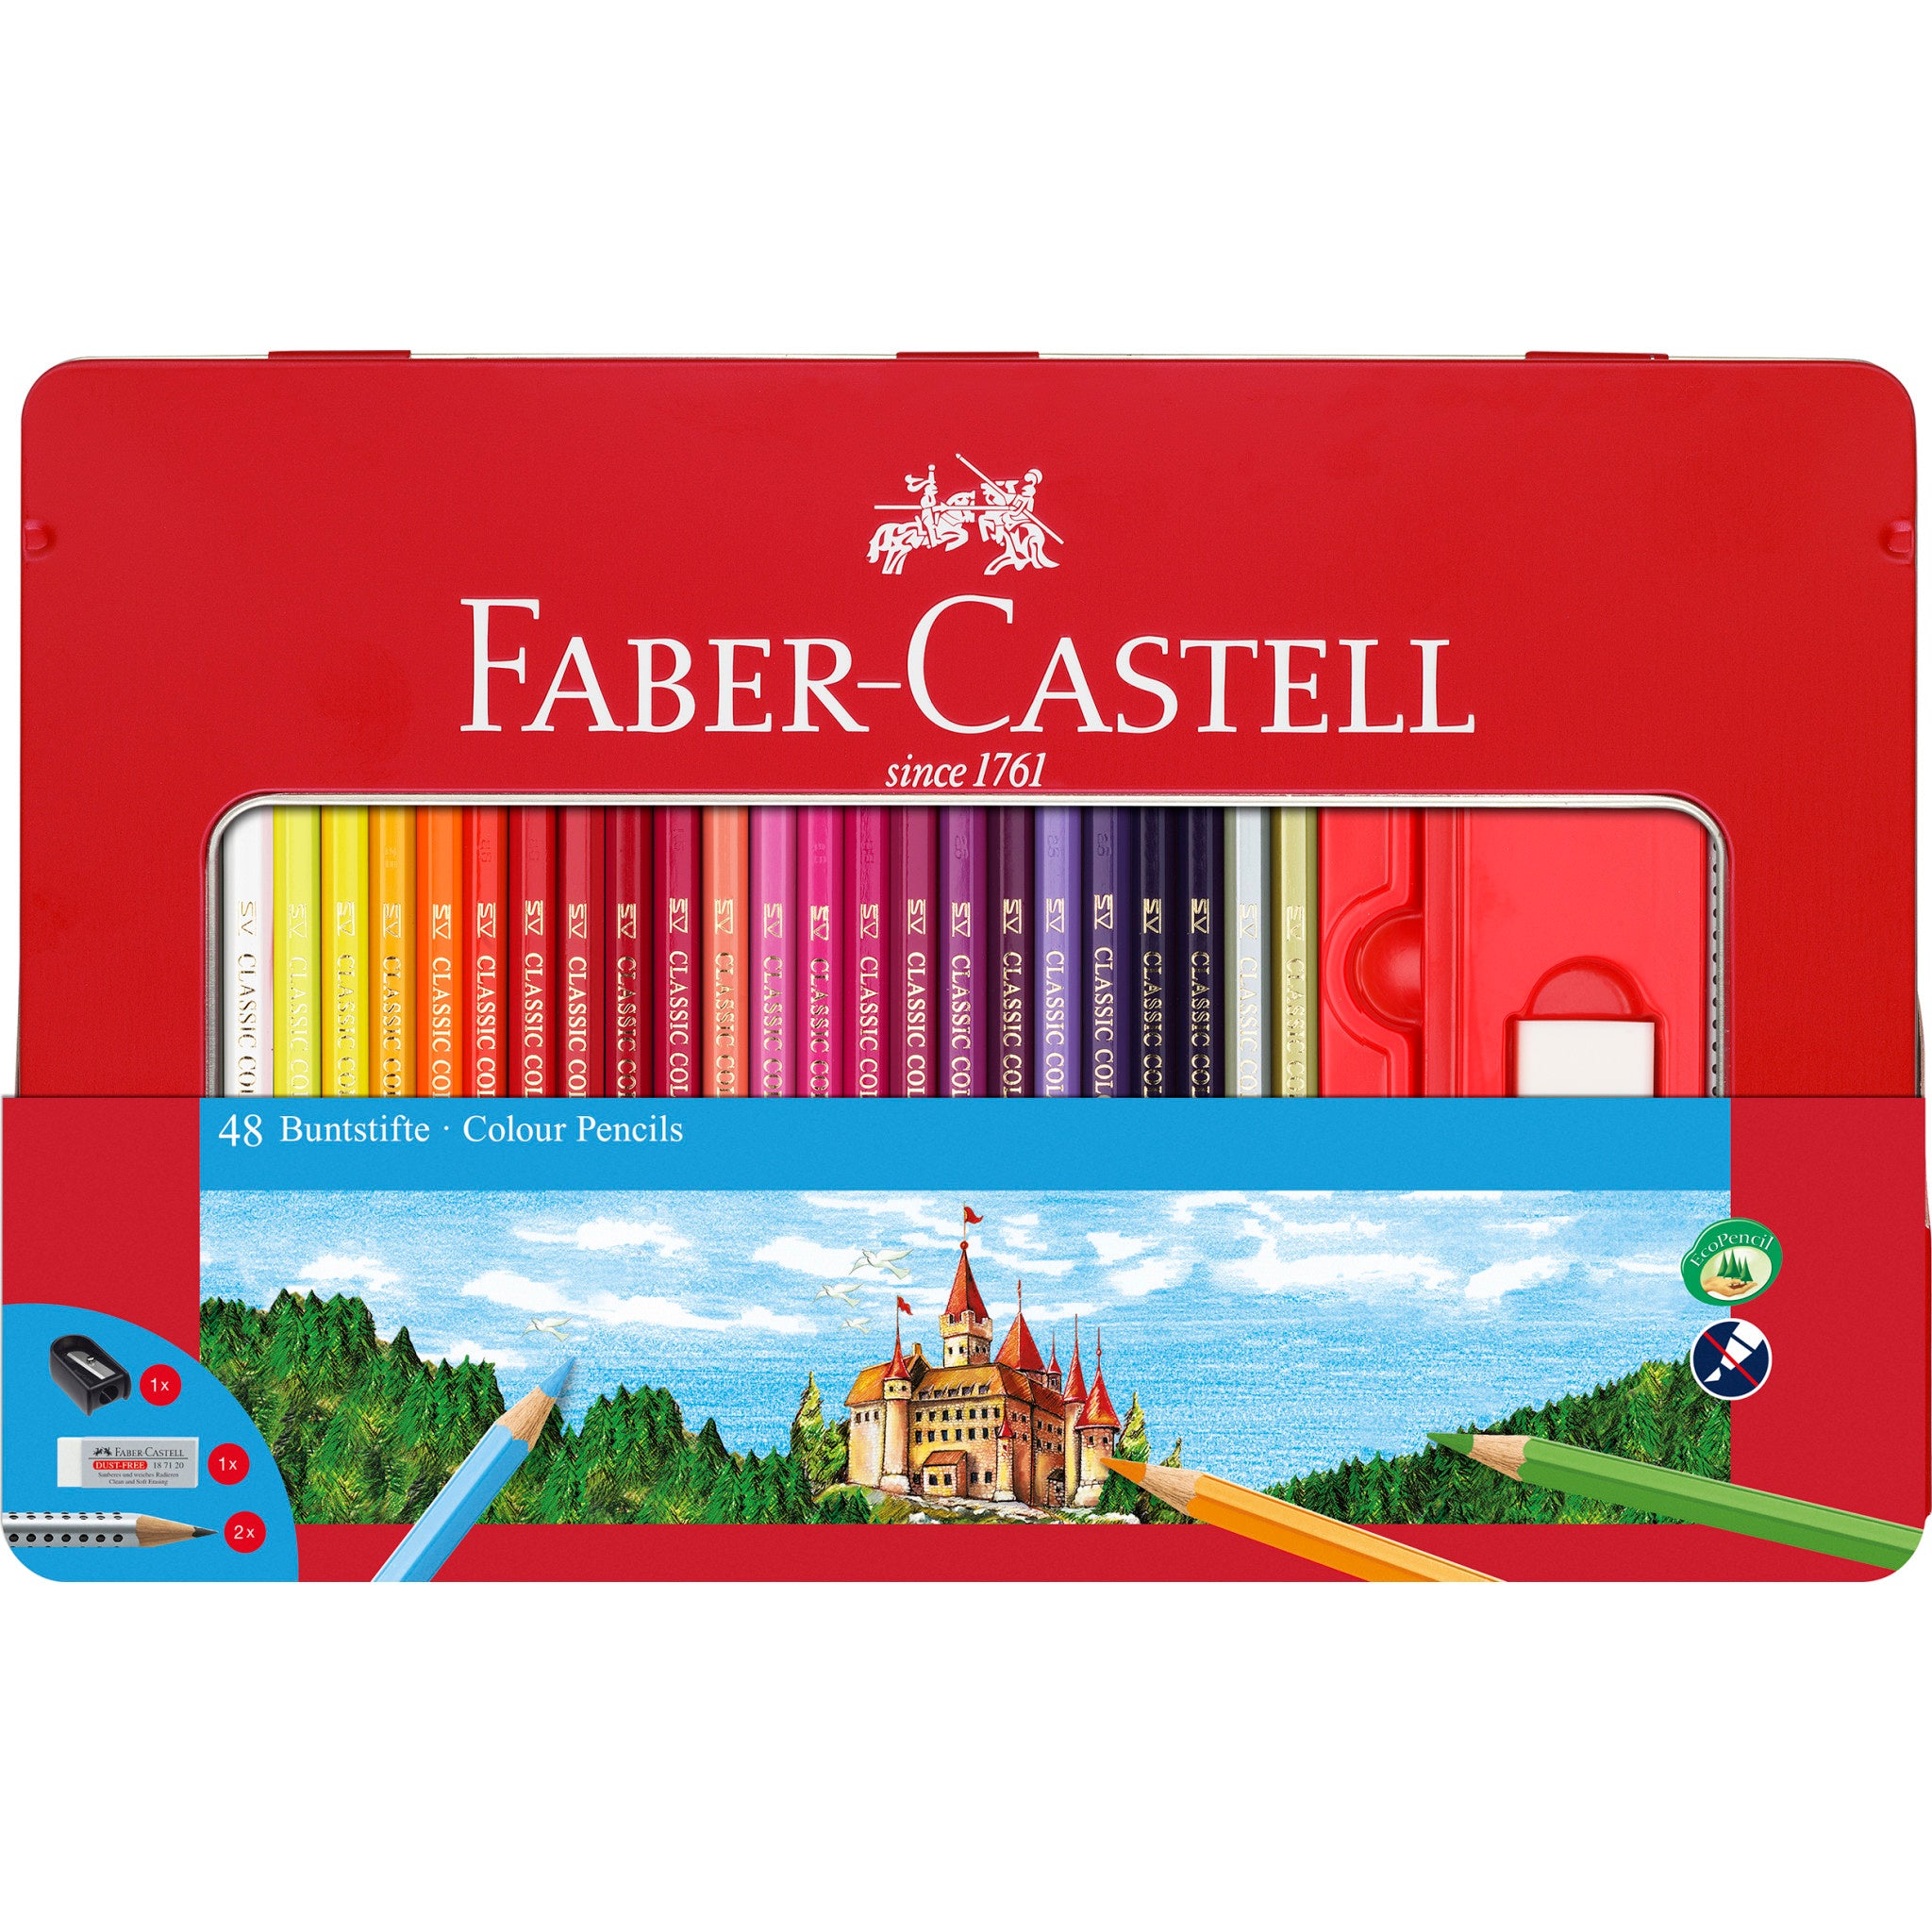 Children and Coloring Books KuiiBoii 48 Color Colored Pencils Artist Sketch Drawing Pencil Art Craft Supplies. Suitable for Adults 